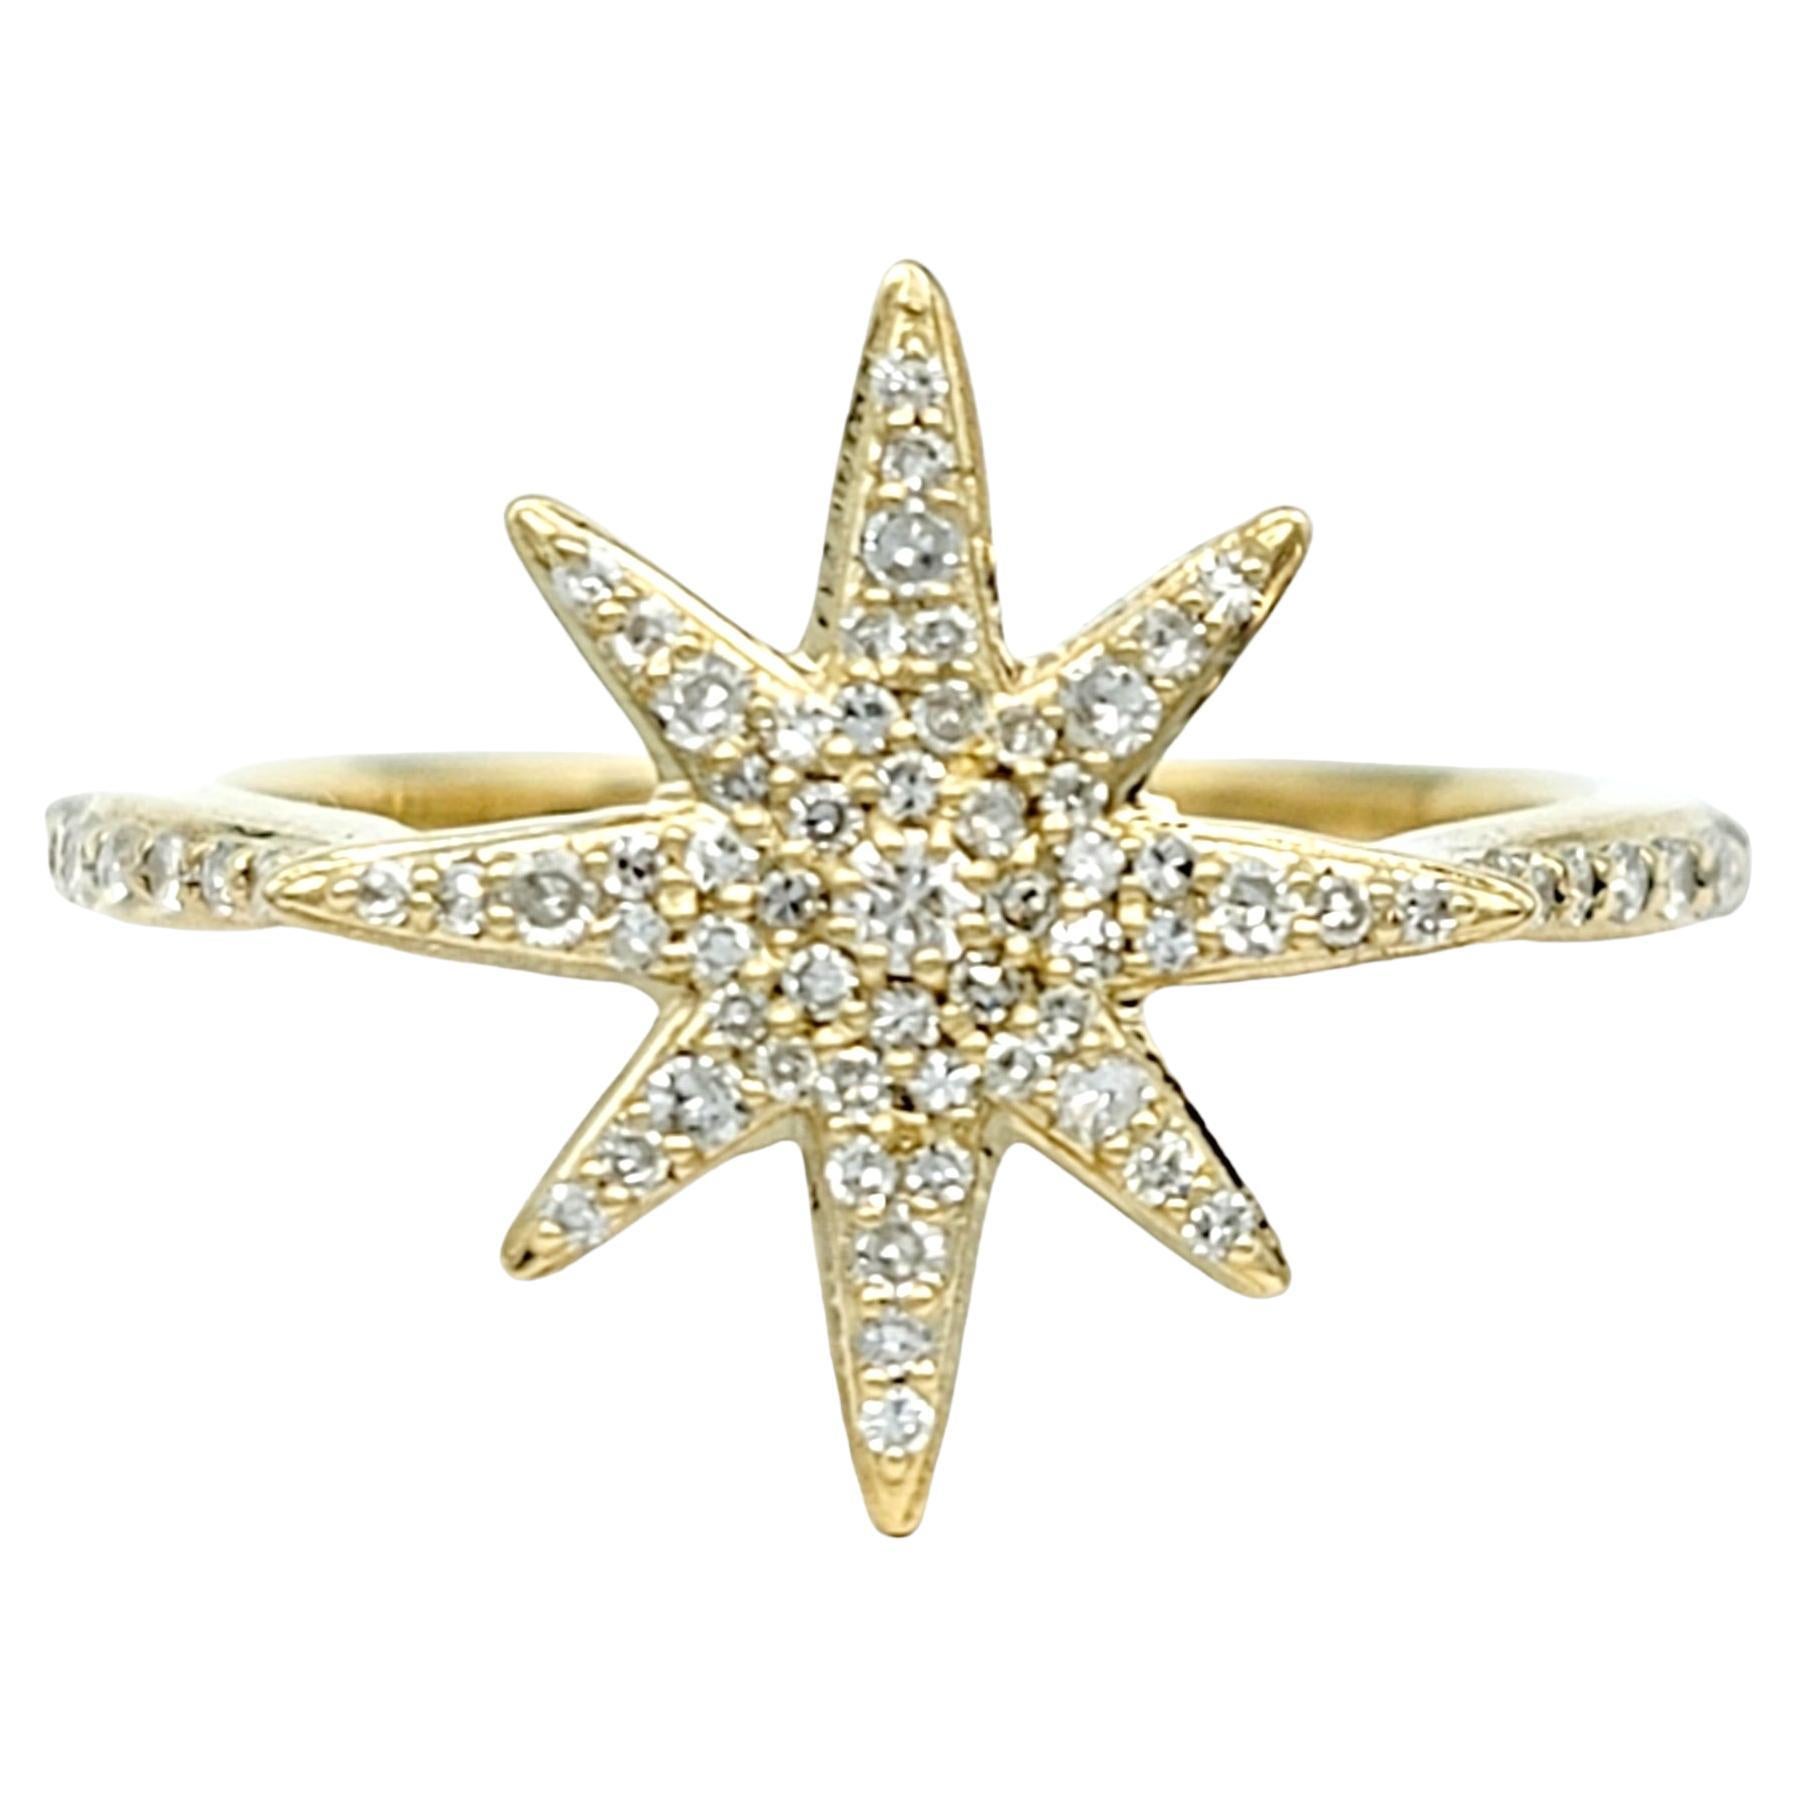 Ring size: 7 

This gorgeous 14 karat yellow gold ring boasts an exquisite design, featuring an captivating 8-point star adorned with pavé-set round white diamonds. This central motif immediately captures the eye with its intricate brilliance,